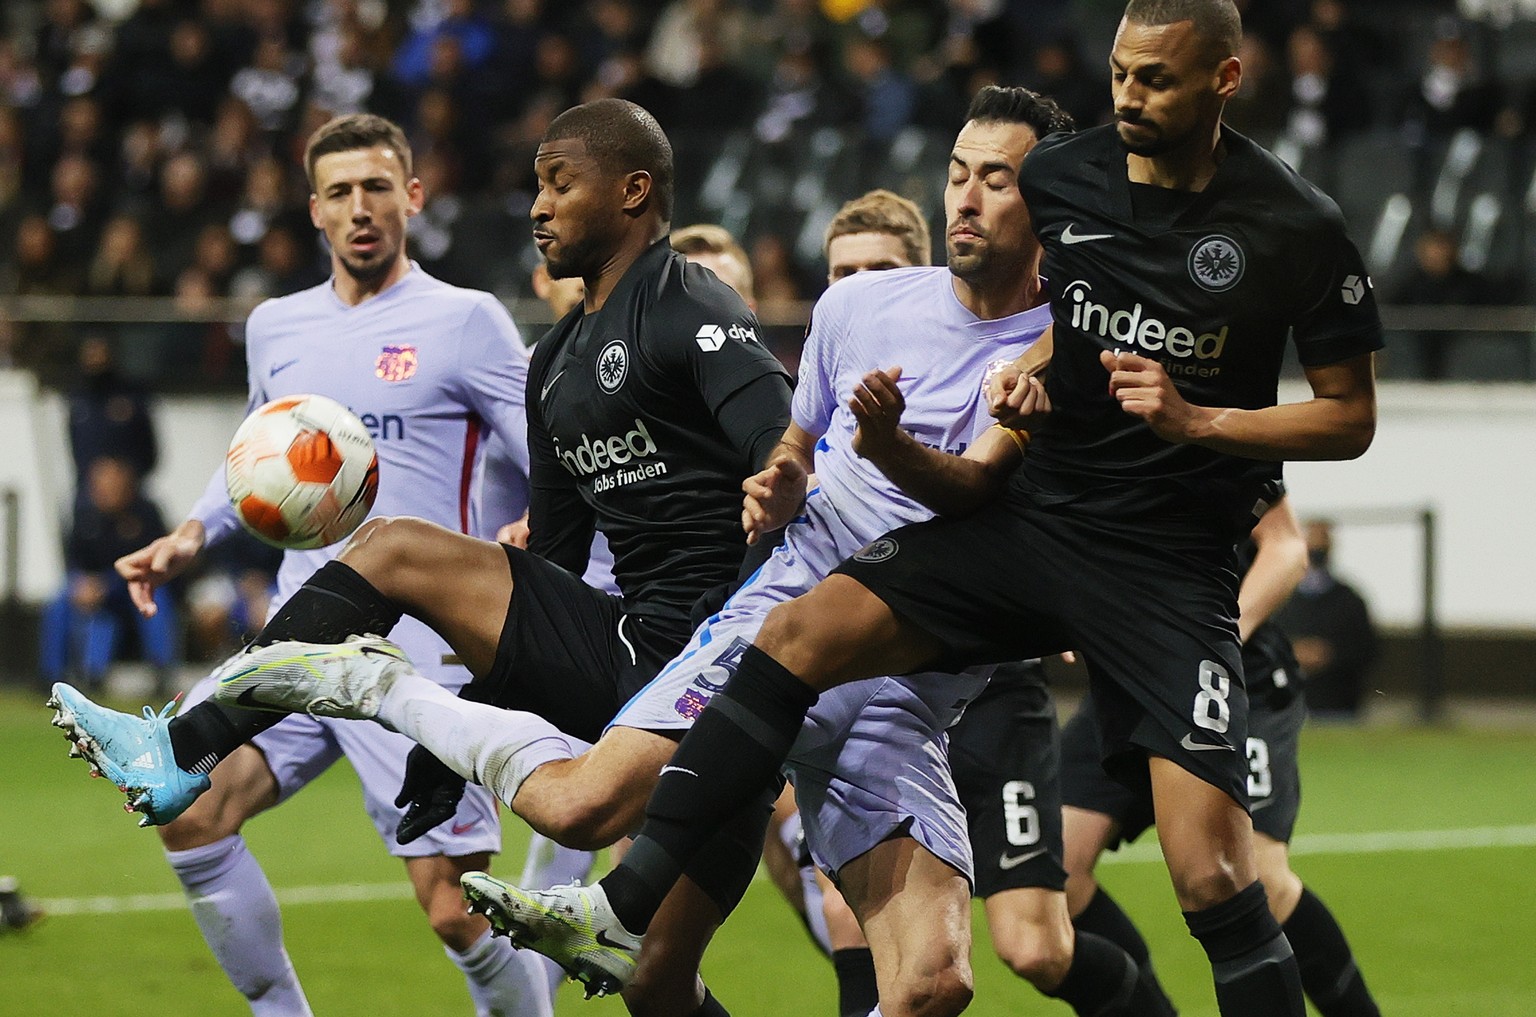 epa09877140 Djibril Sow (R) and Almamy Toure of Frankfurt in action against Sergio Busquets (C) of Barcelona during the UEFA Europa League quarter final, first leg soccer match between Eintracht Frank ...